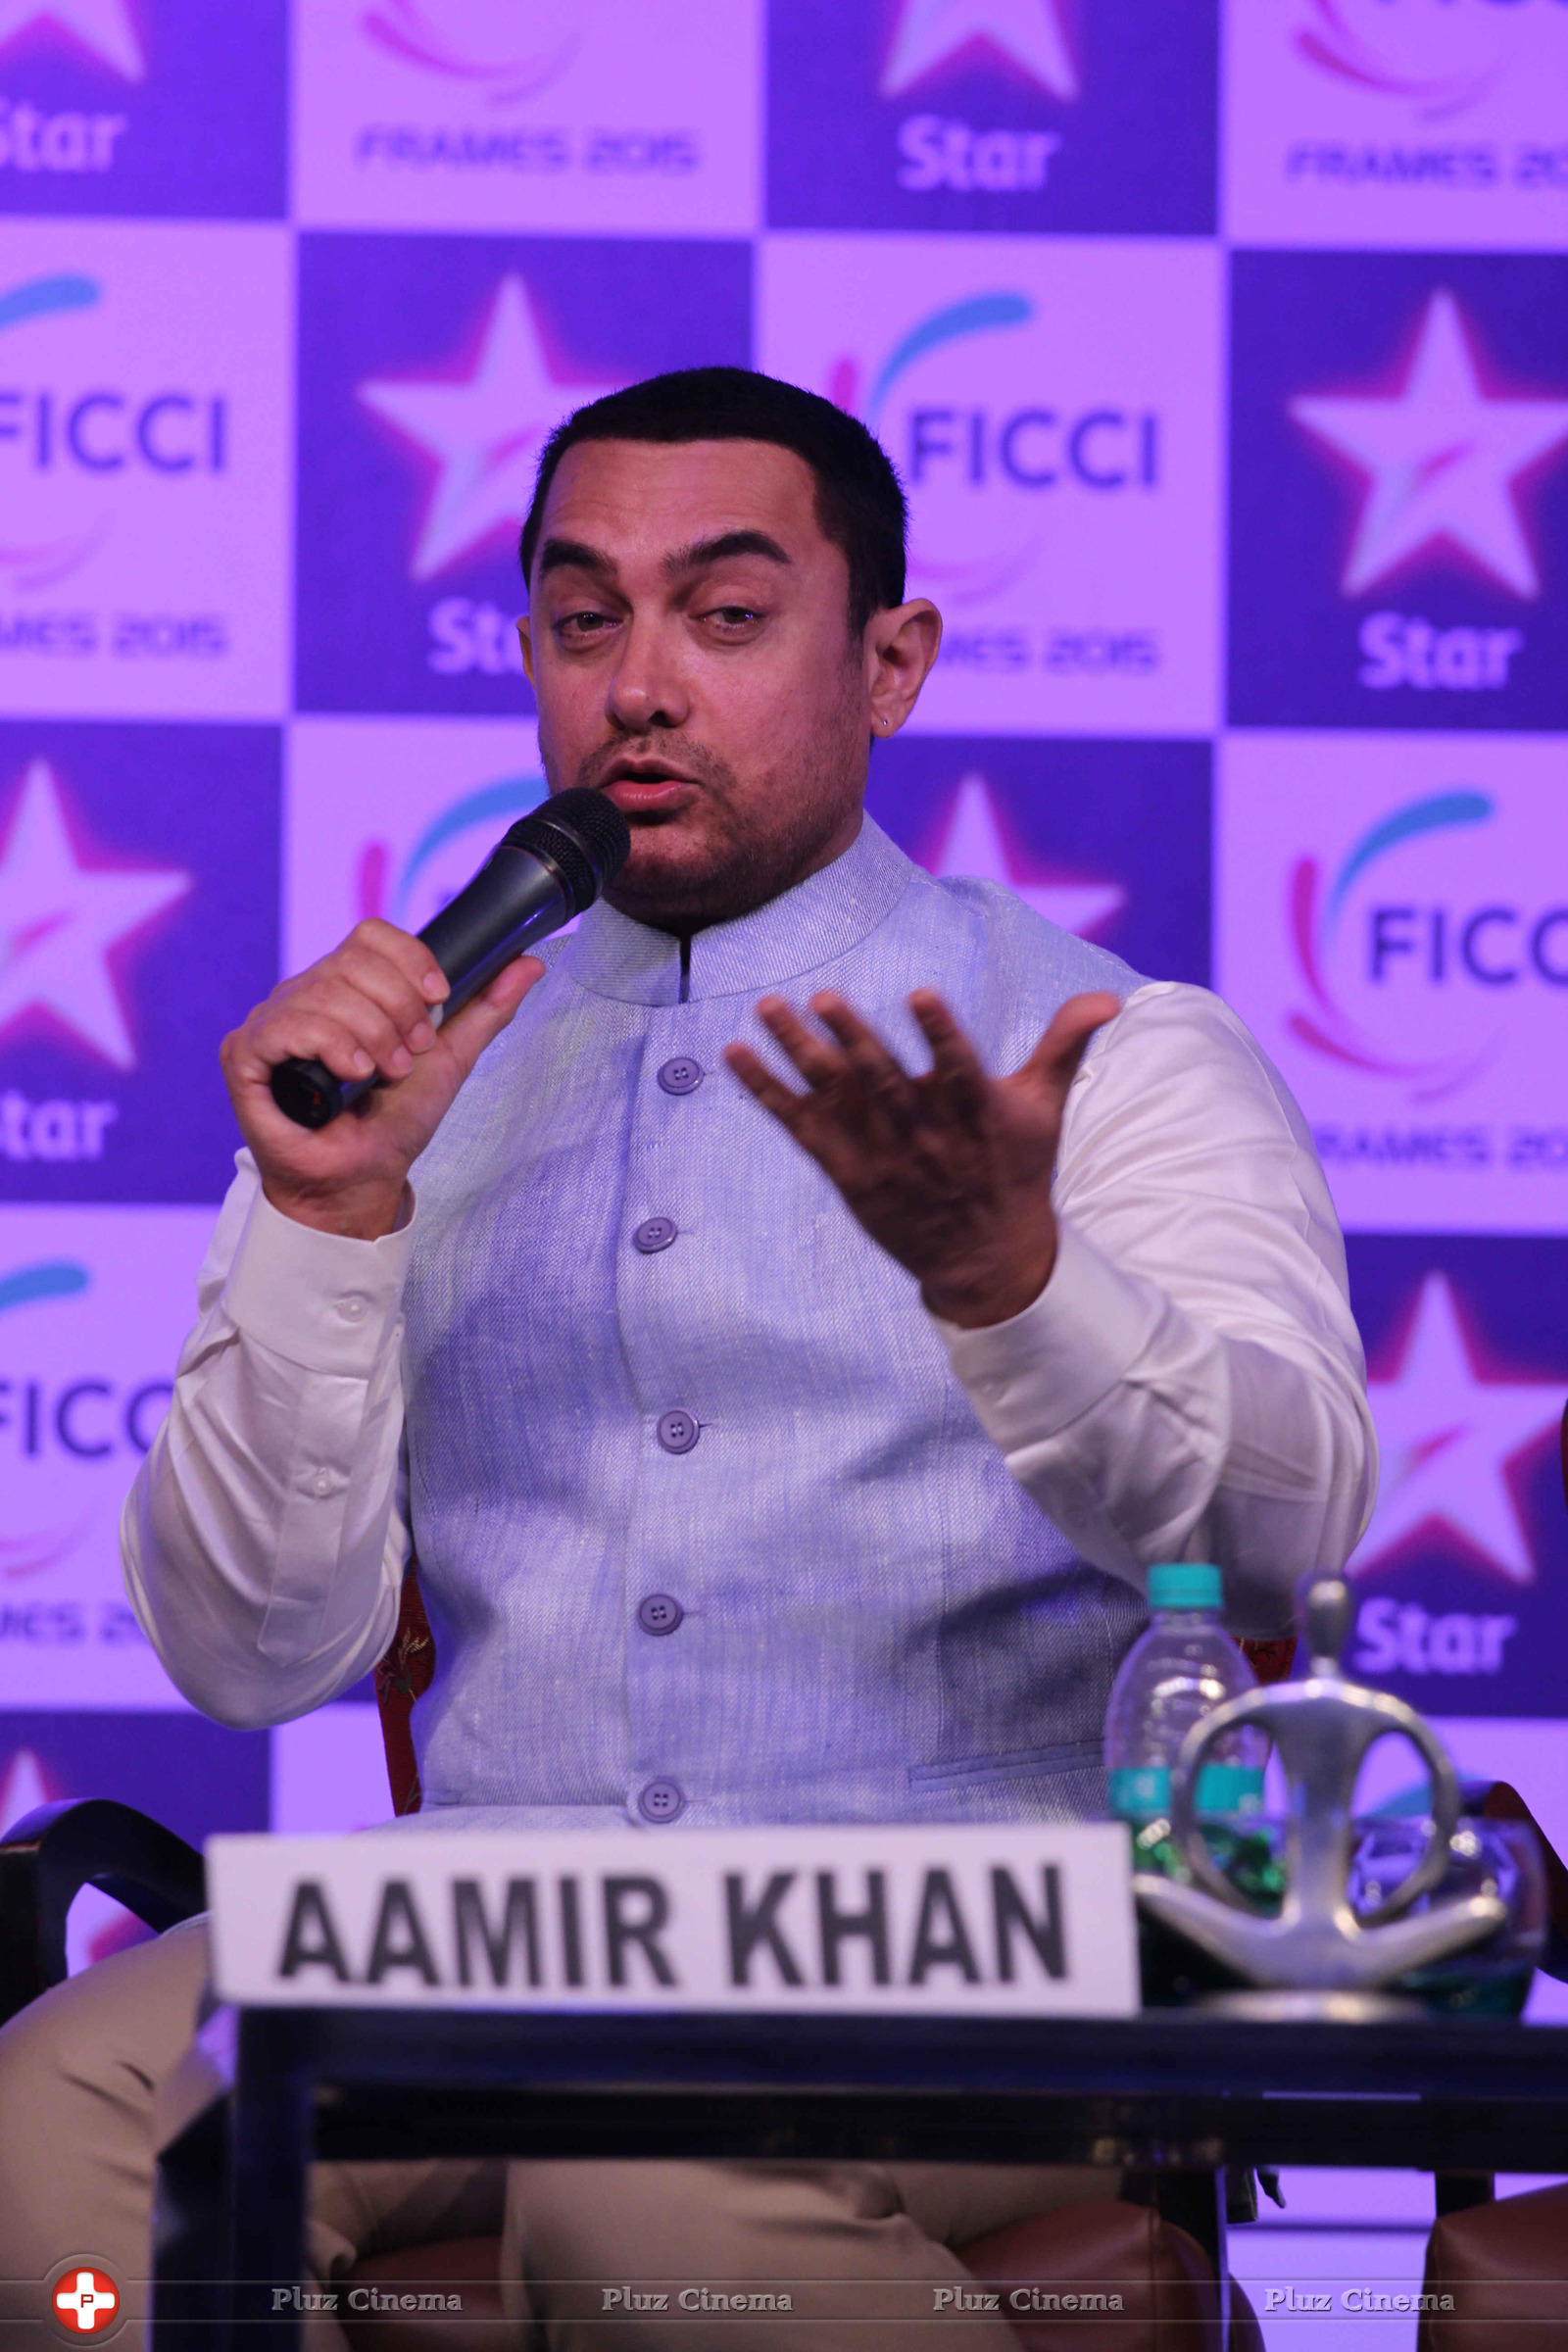 Aamir Khan - Aamir Khan with Kamal Haasan at the inaugural session of FICCI Frames 2015 Photos | Picture 1001456